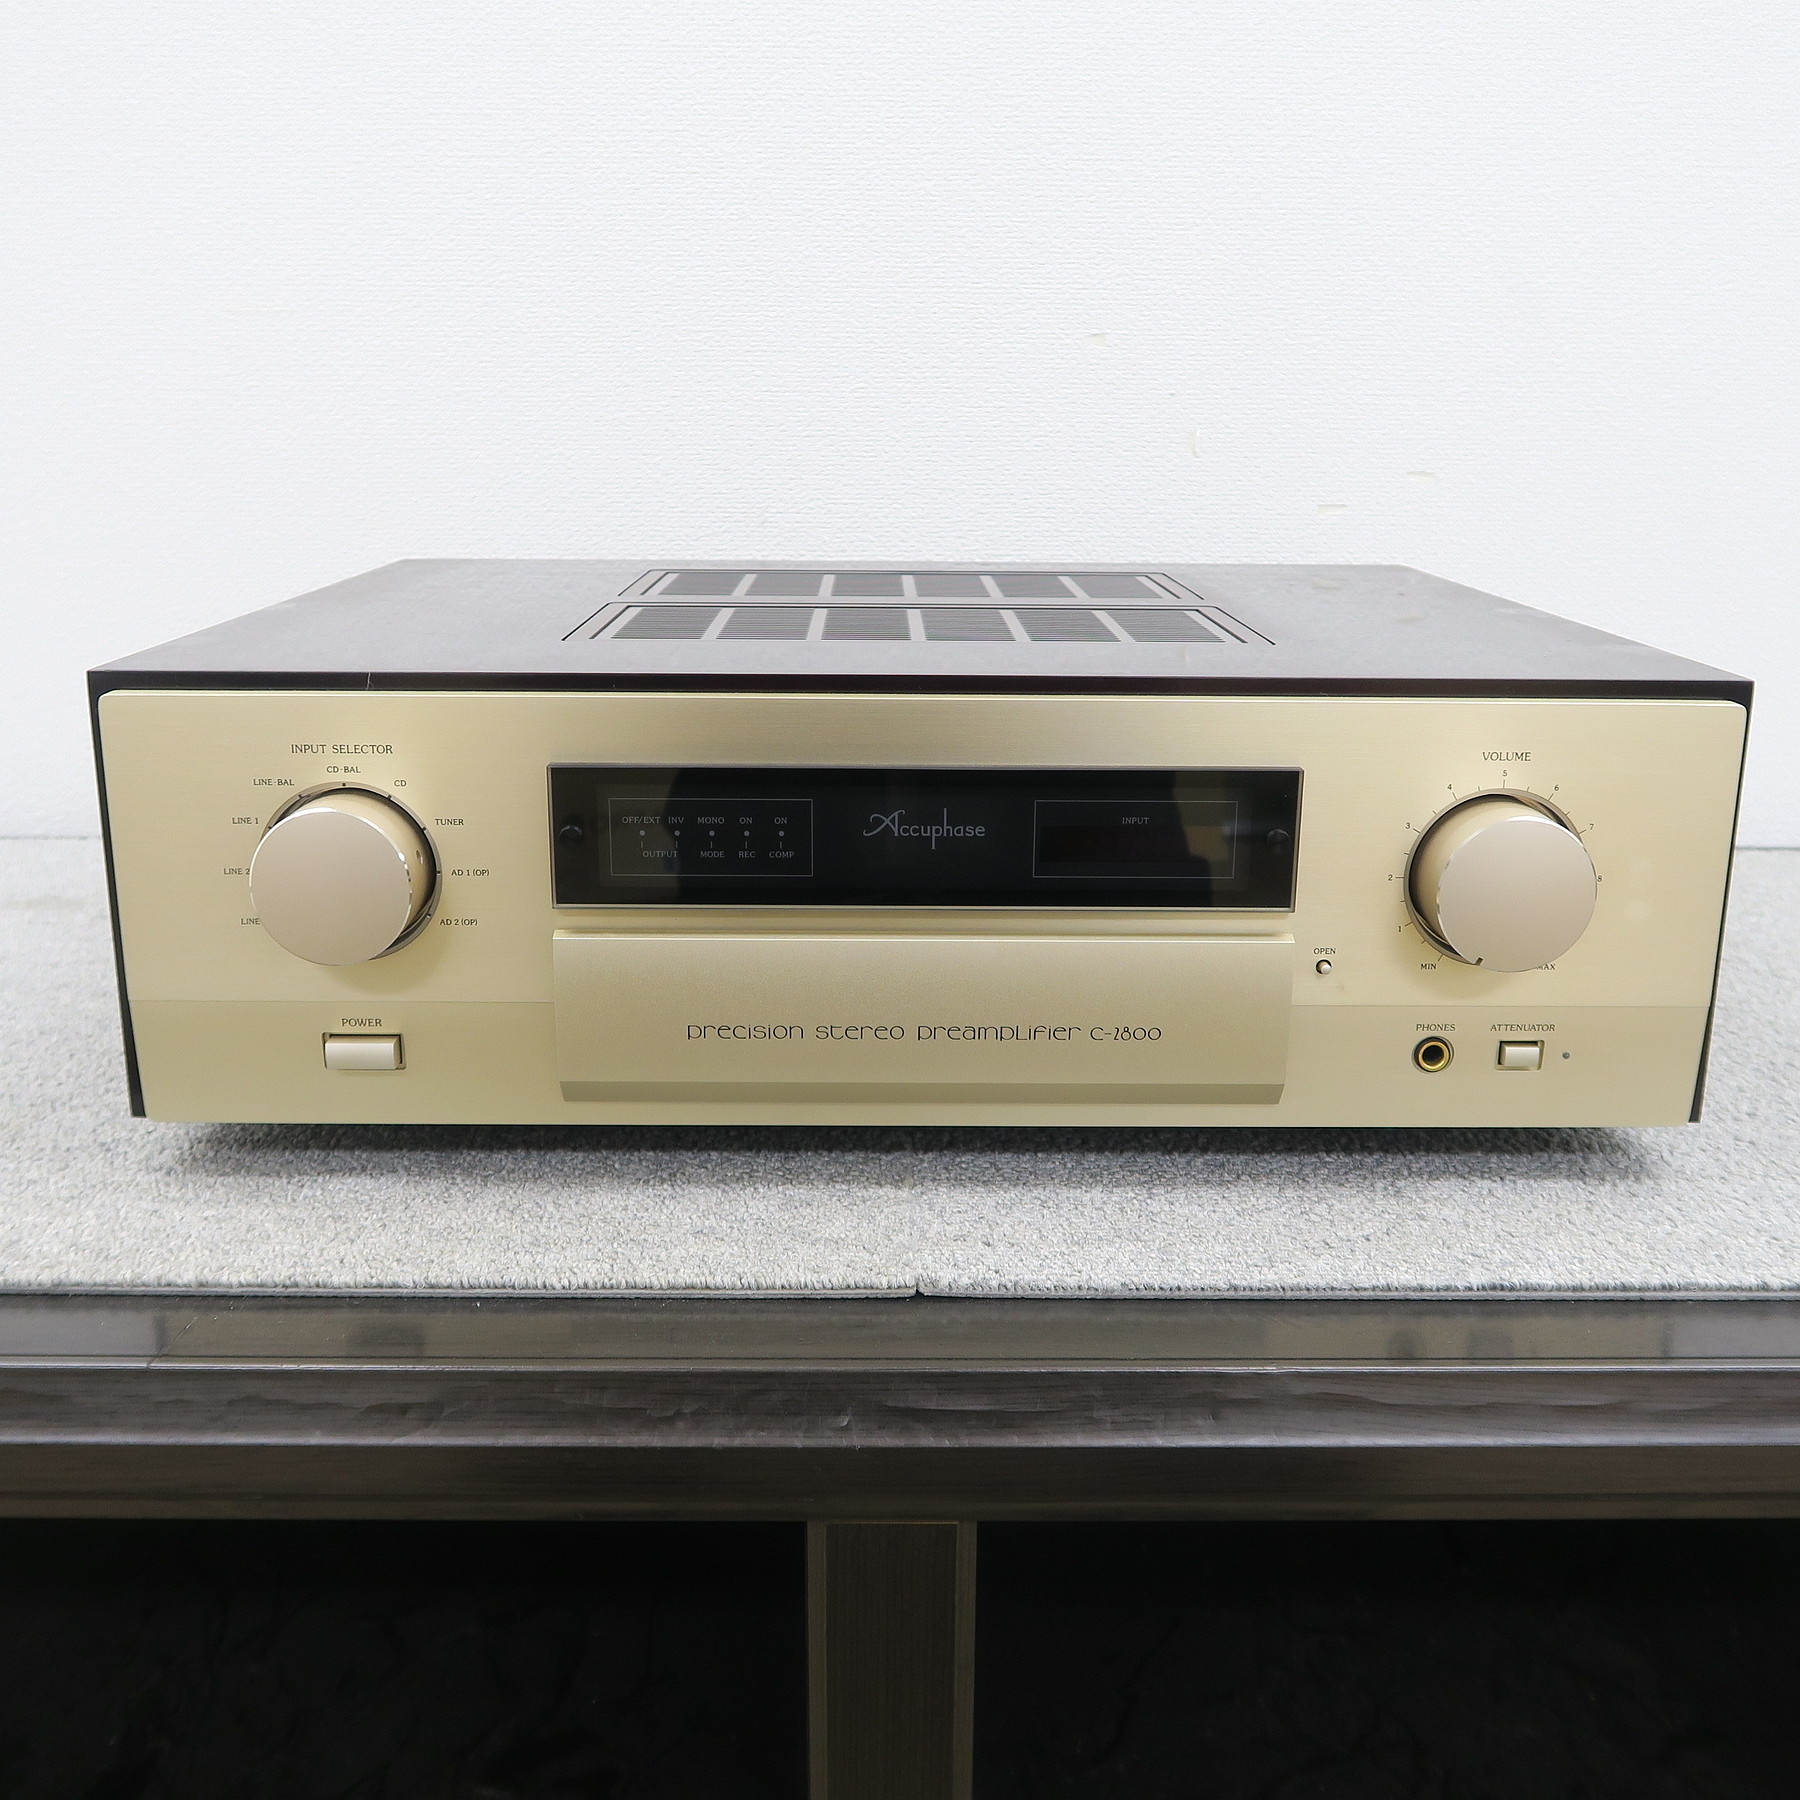 Aランク】アキュフェーズ Accuphase C-2800 プリアンプ @54994 / 中古